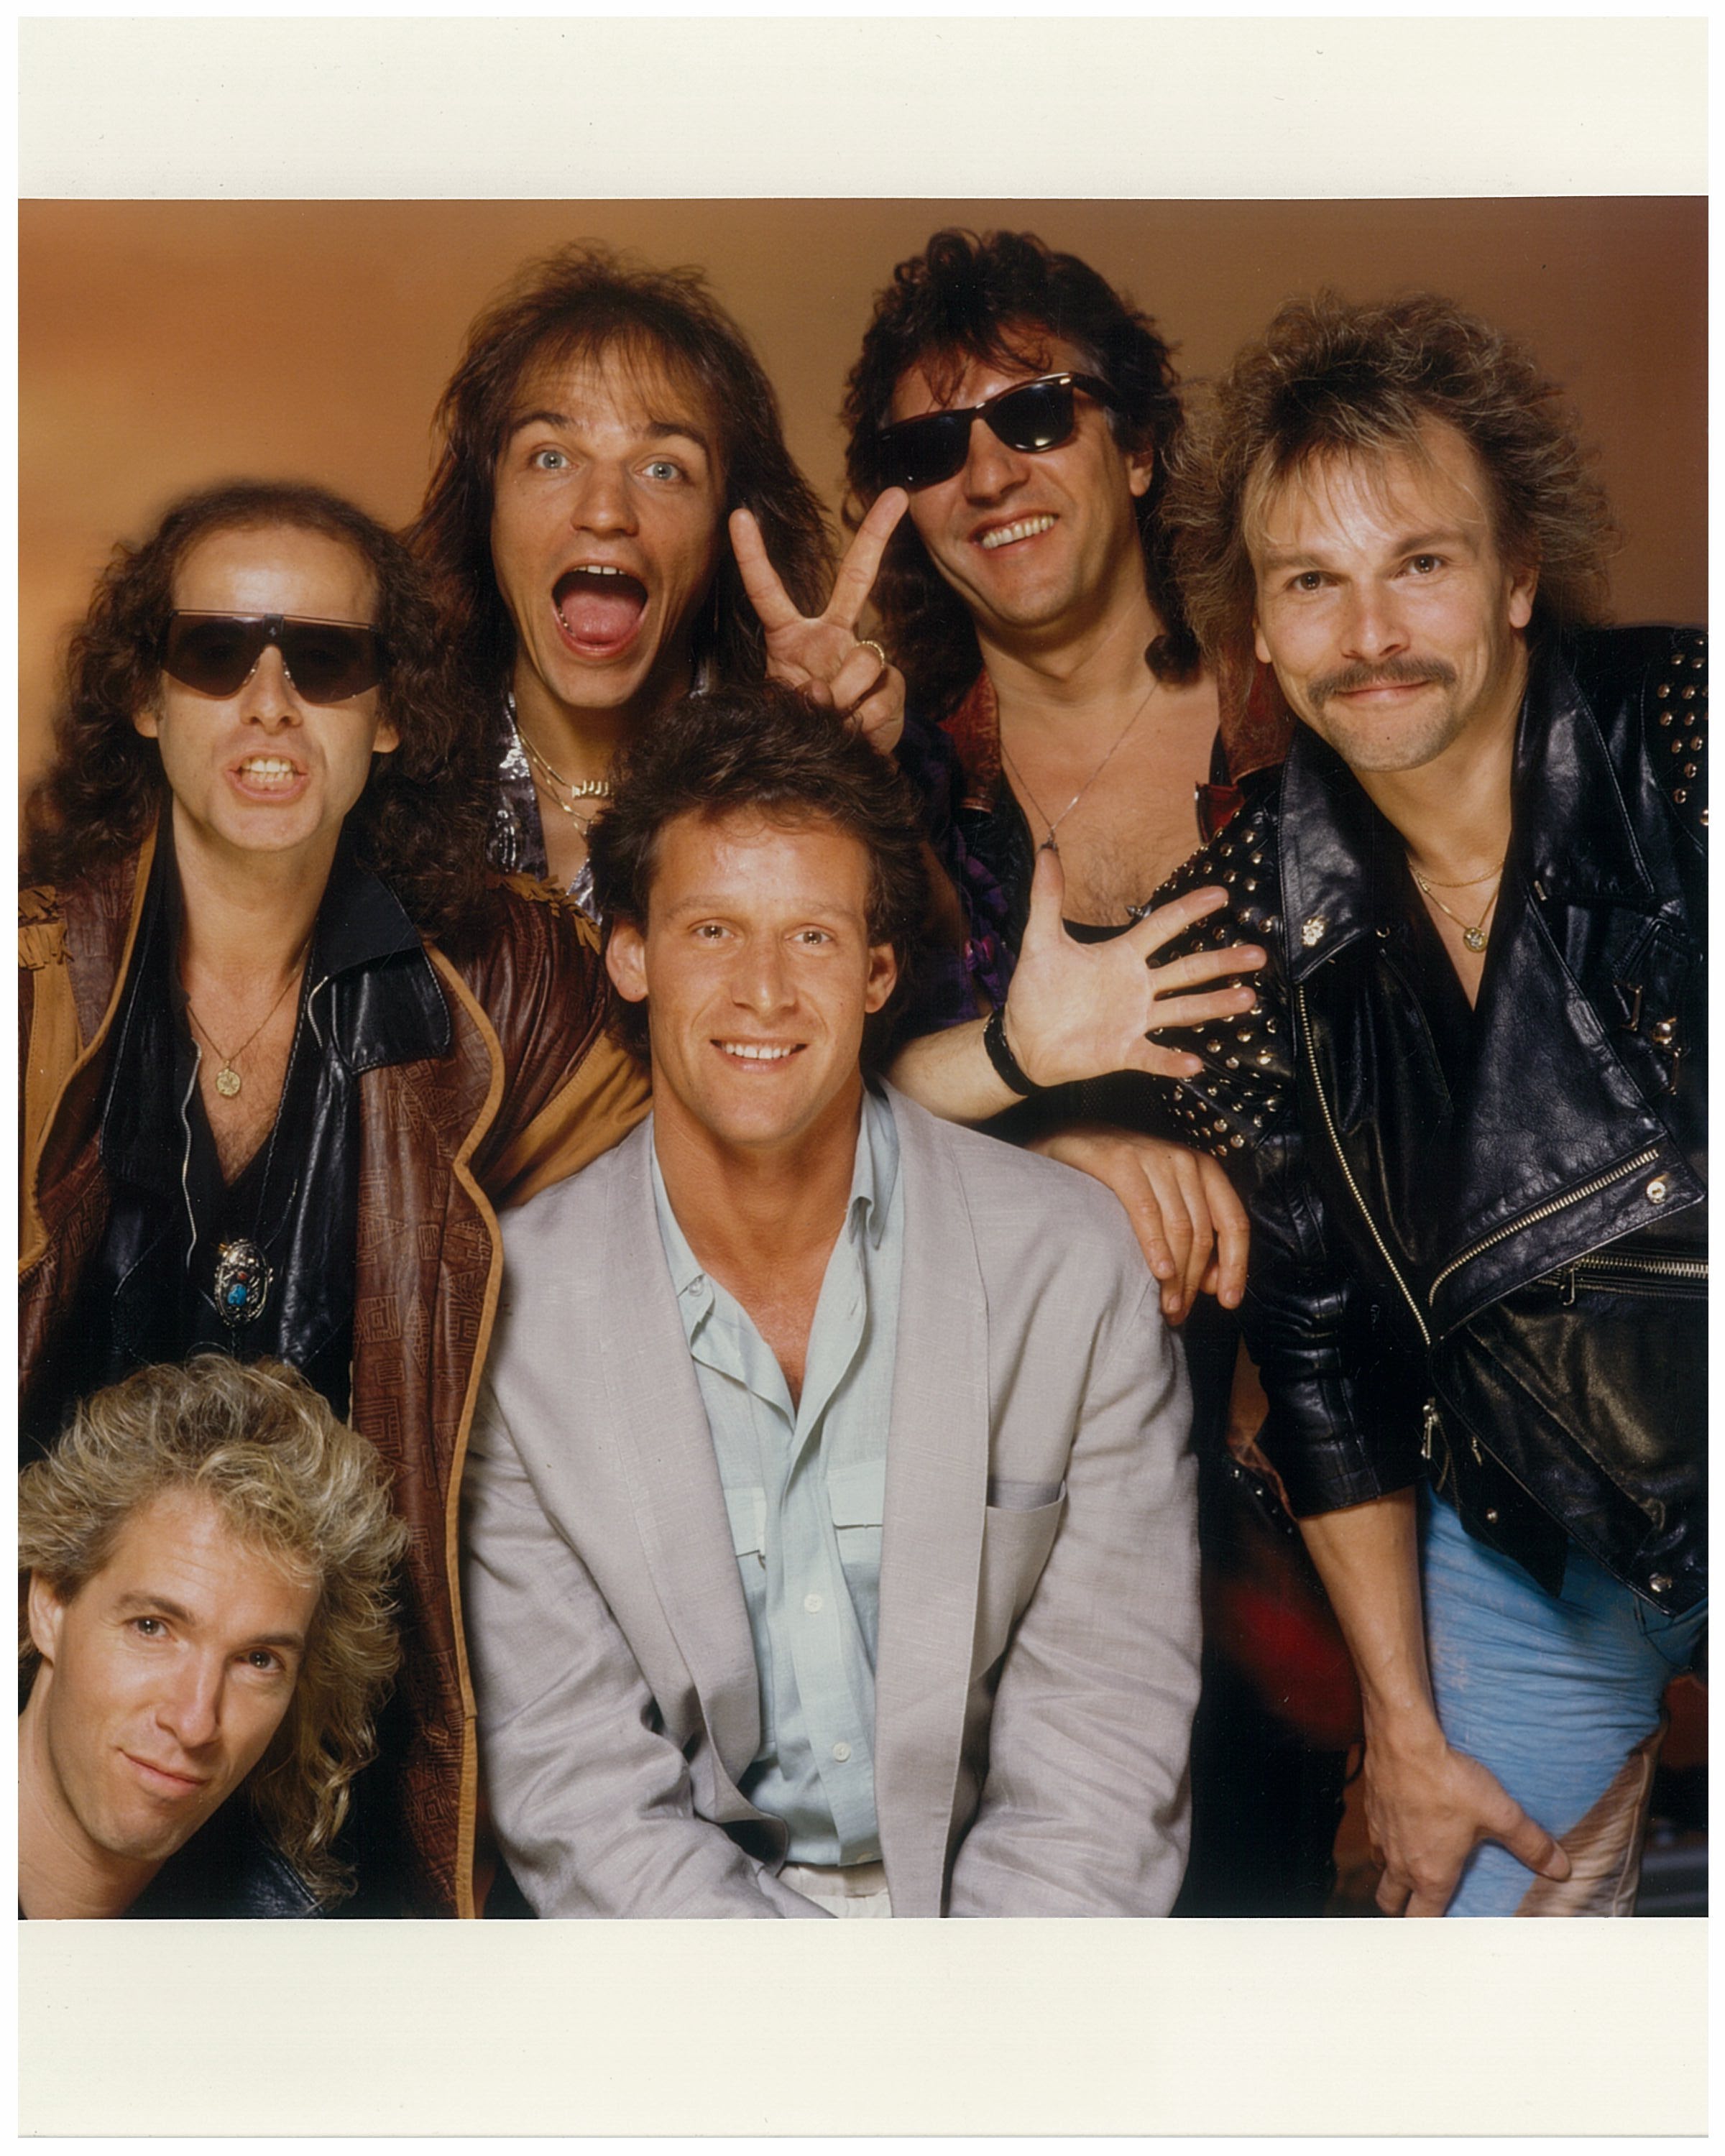 Rob Steinberg with Scorpions